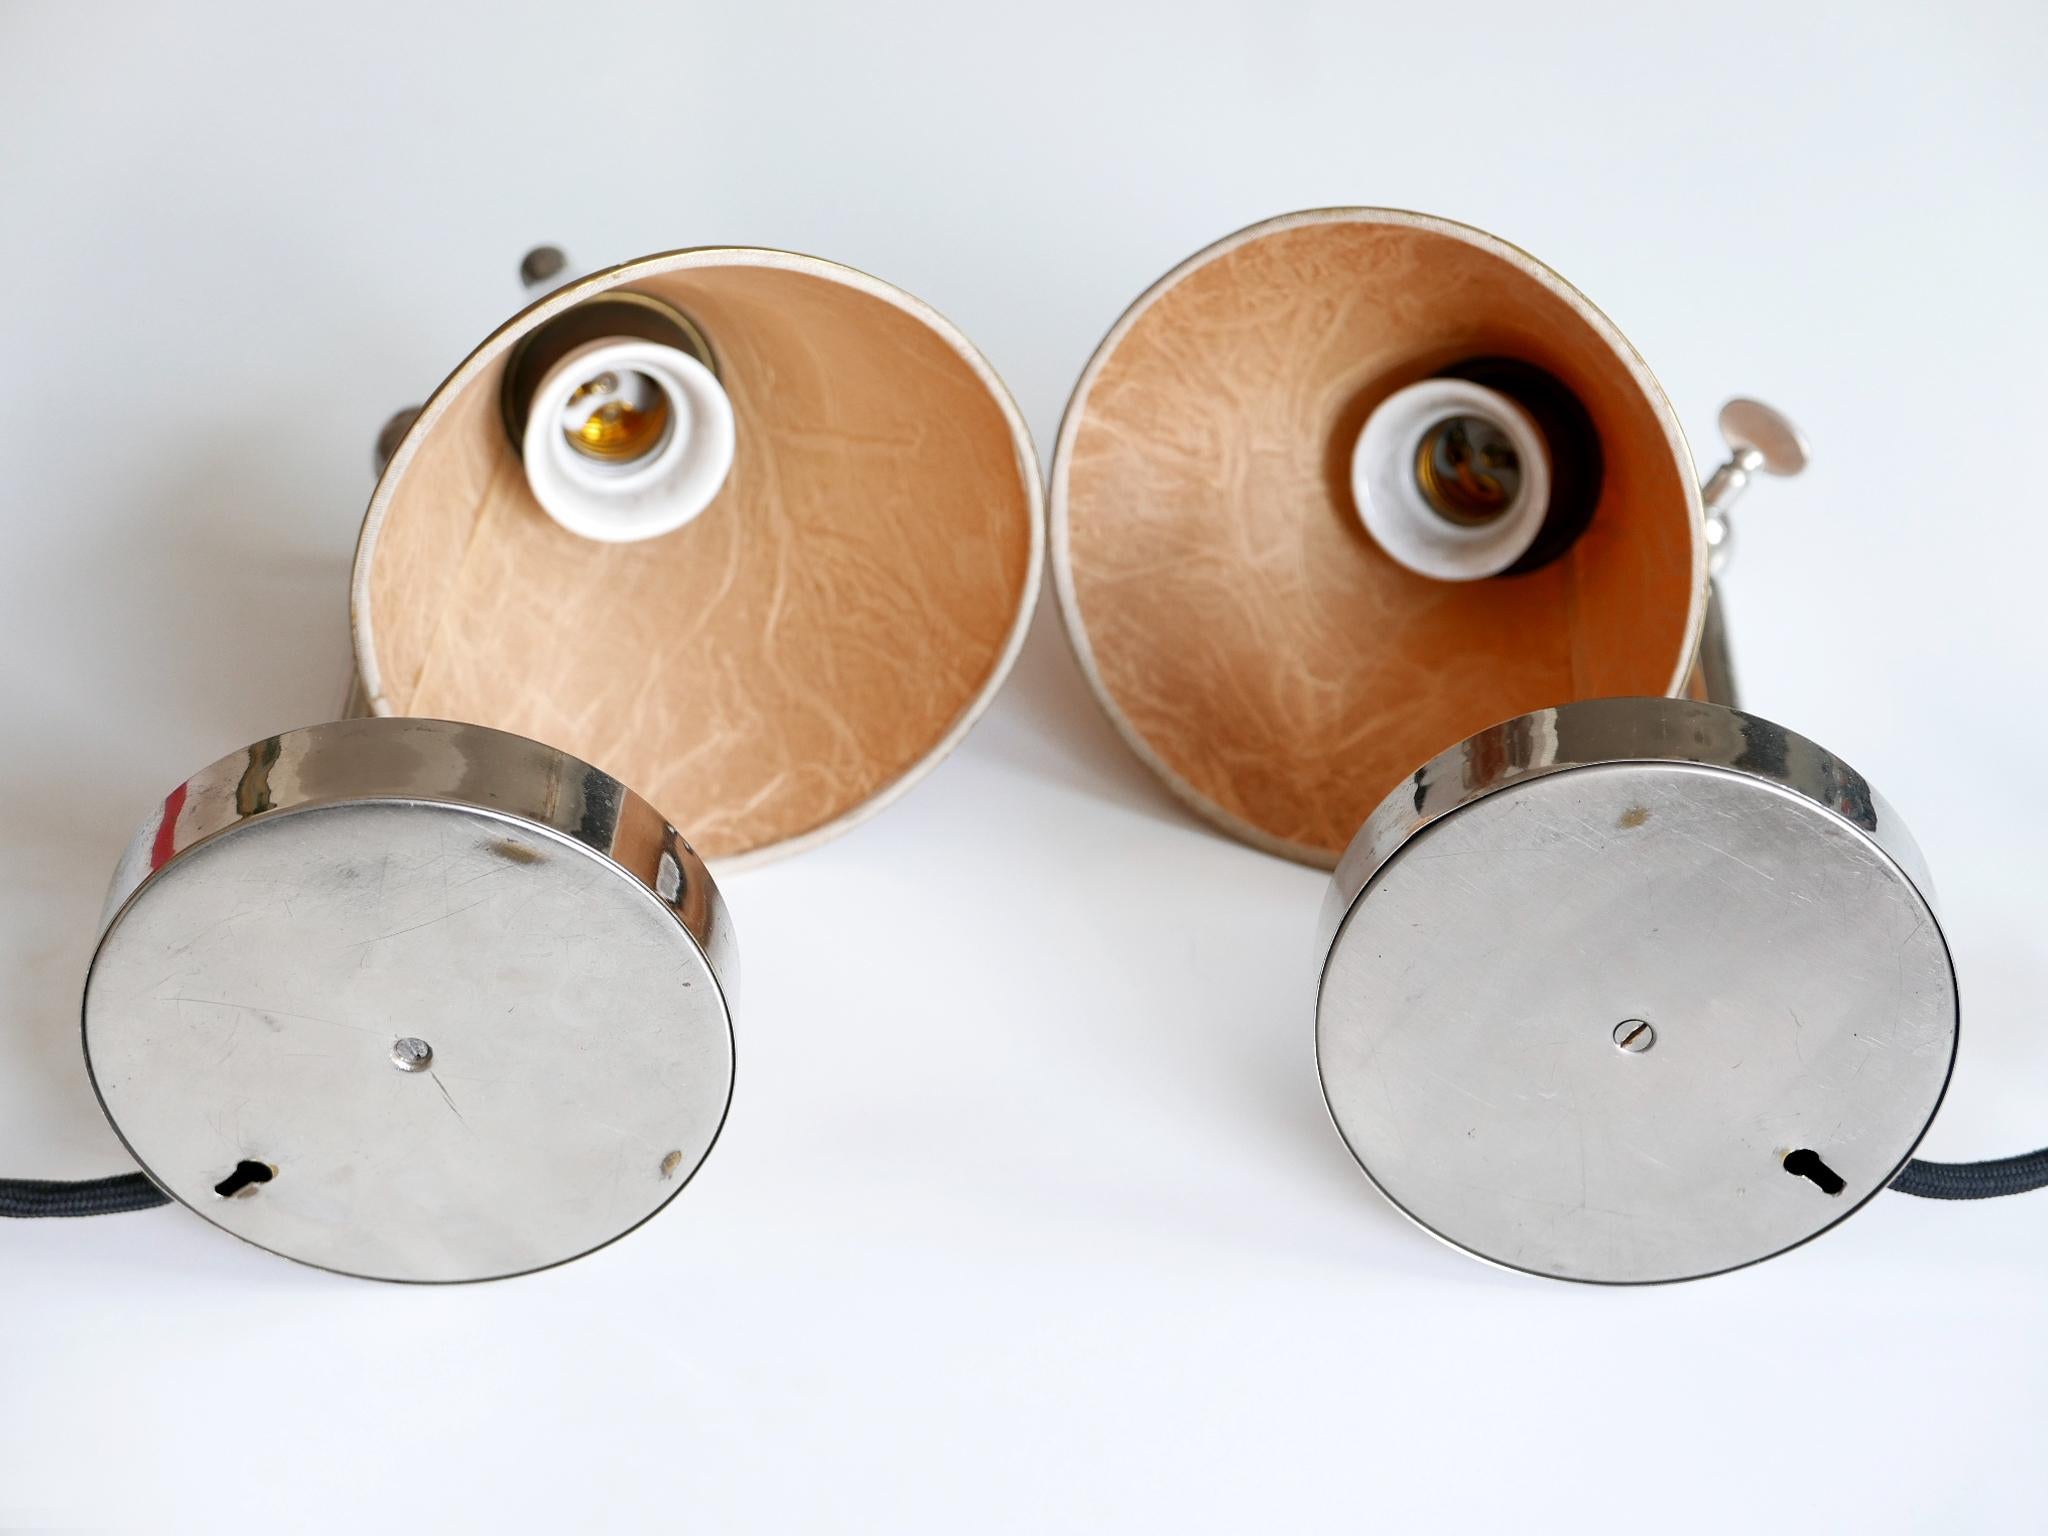 Set of Two Rare Art Deco Bauhaus Bedside Table Lamps or Sconces Germany 1920s For Sale 11